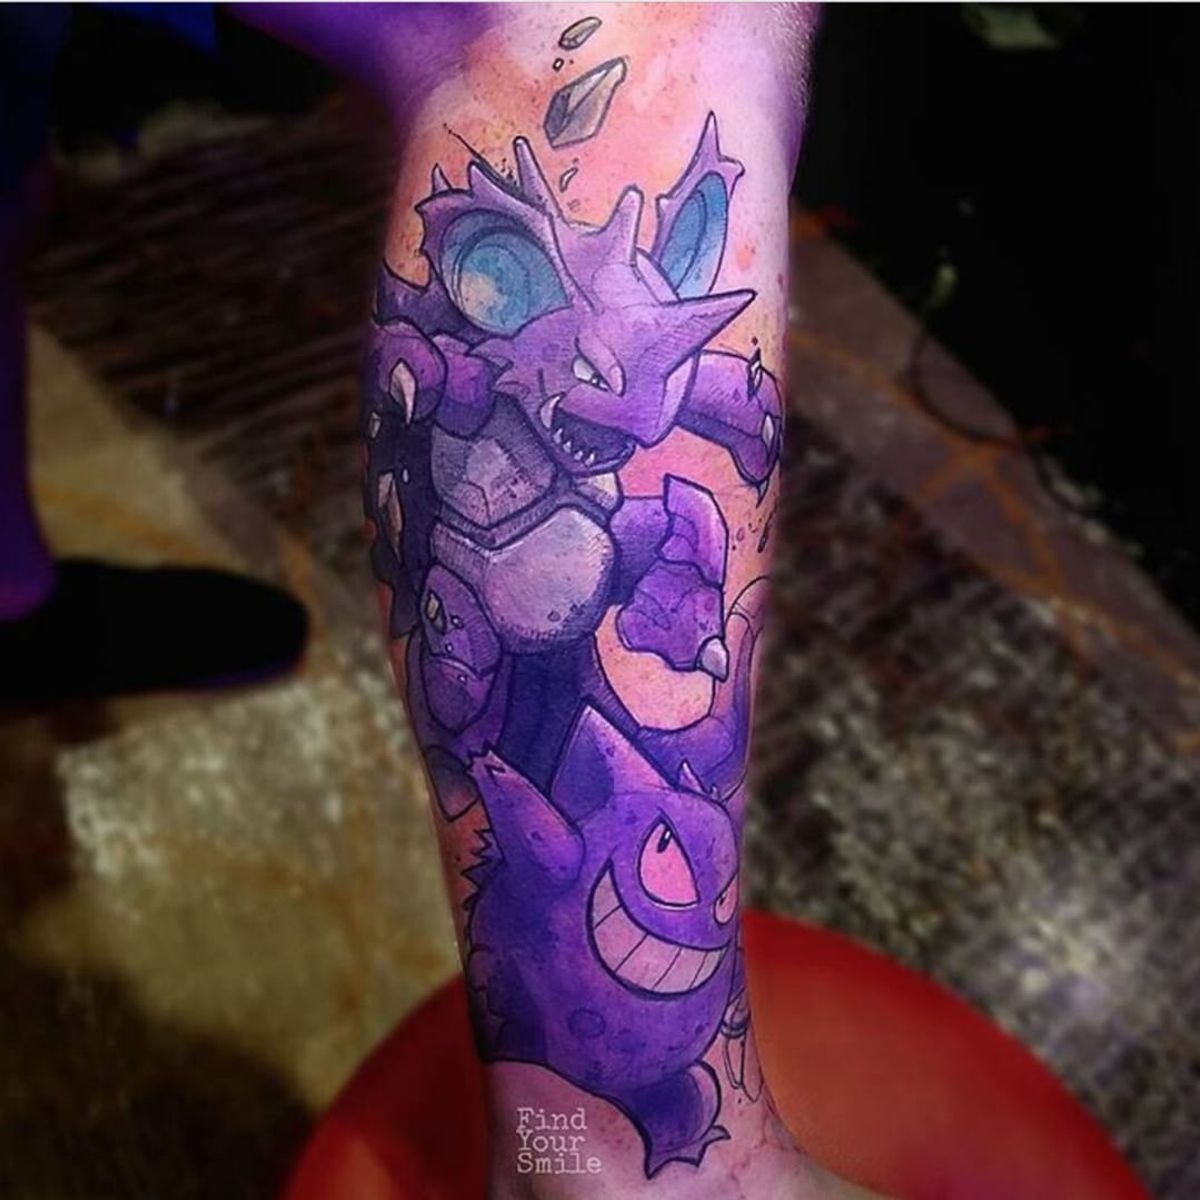 Tattoo uploaded by Ross Howerton • Nidoking and Gengar from Pokemon by ...